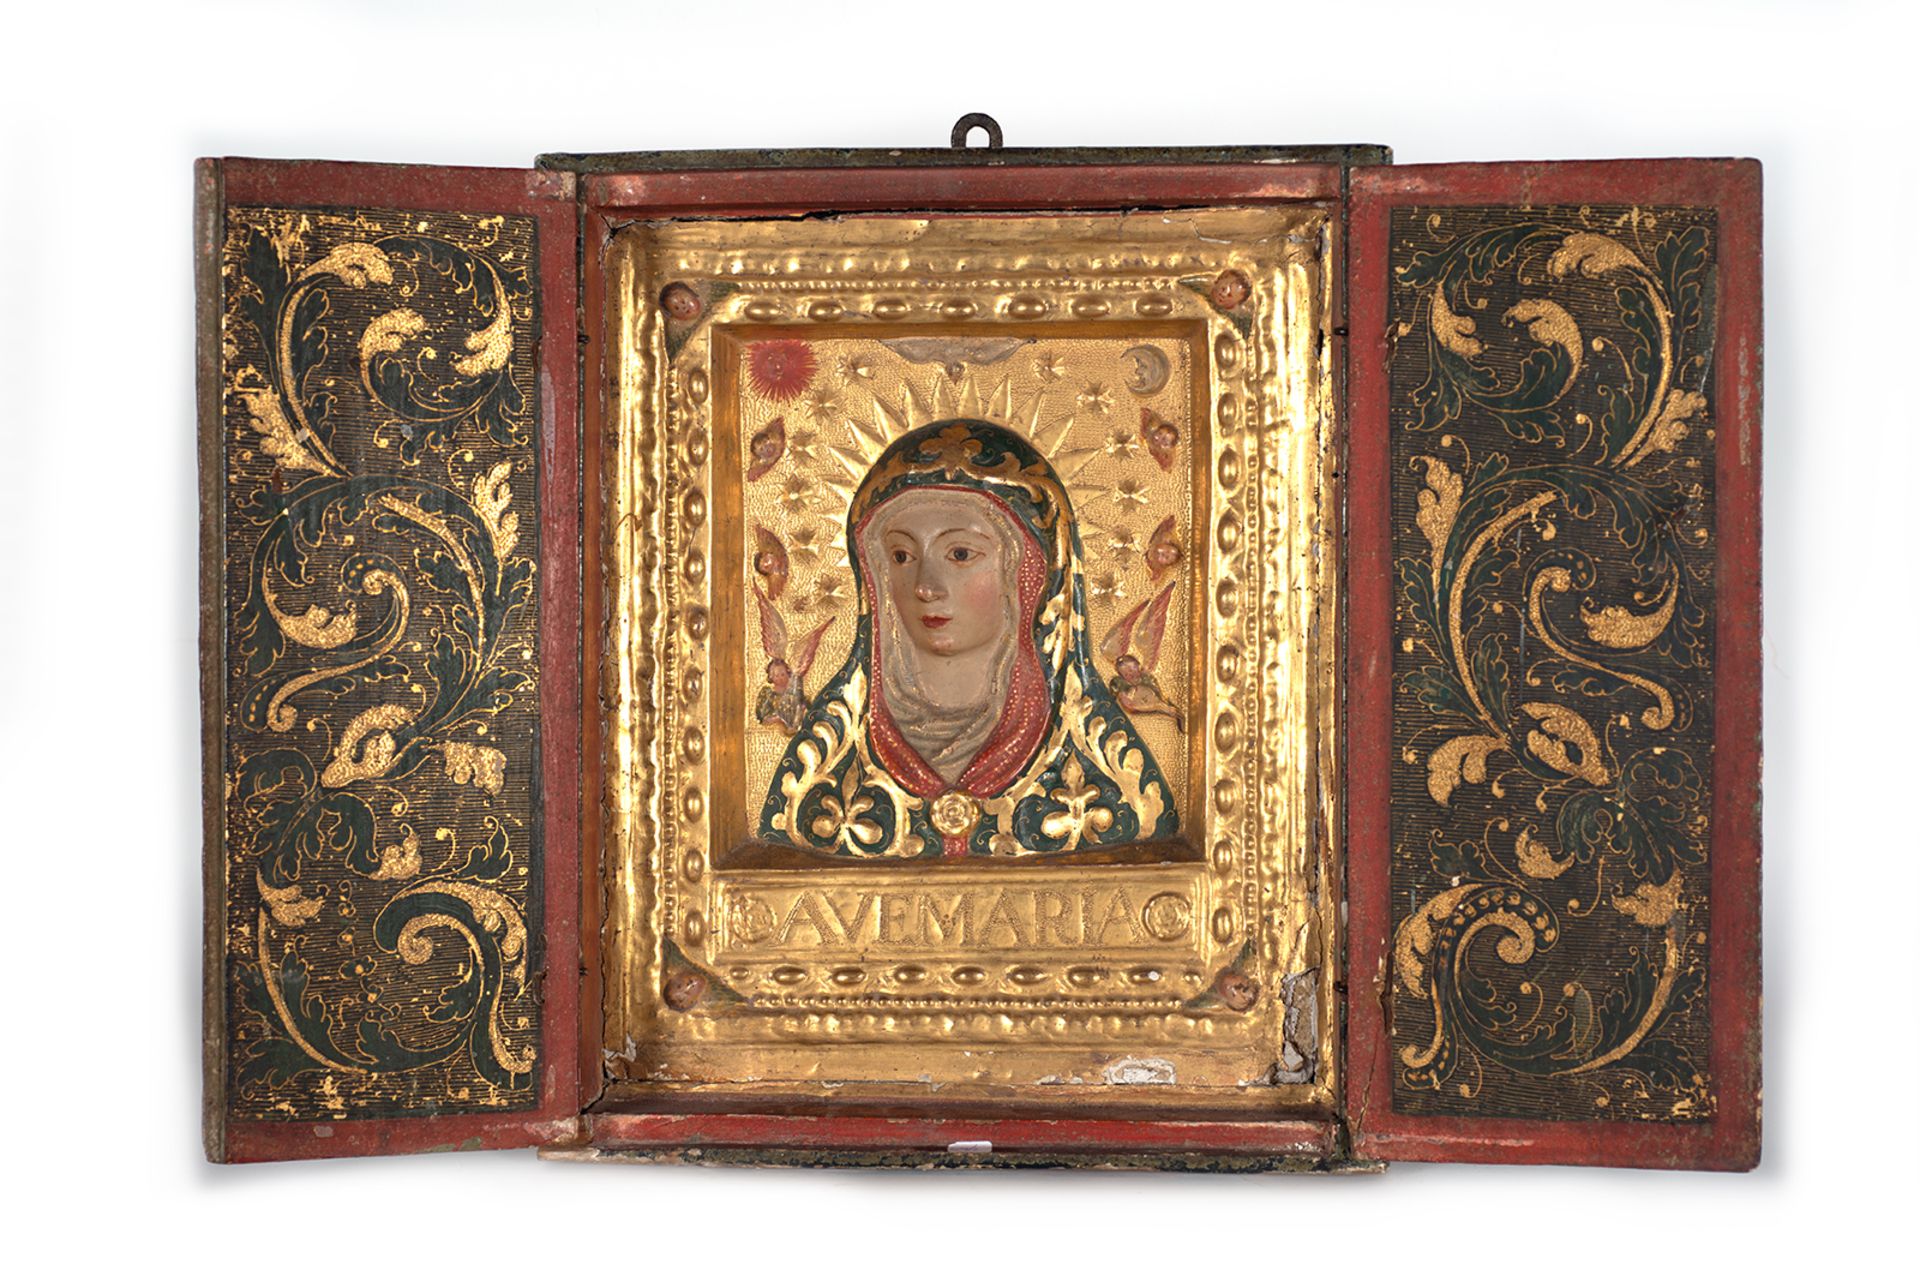 Important tabernacle from the 16th century with the face of Mary